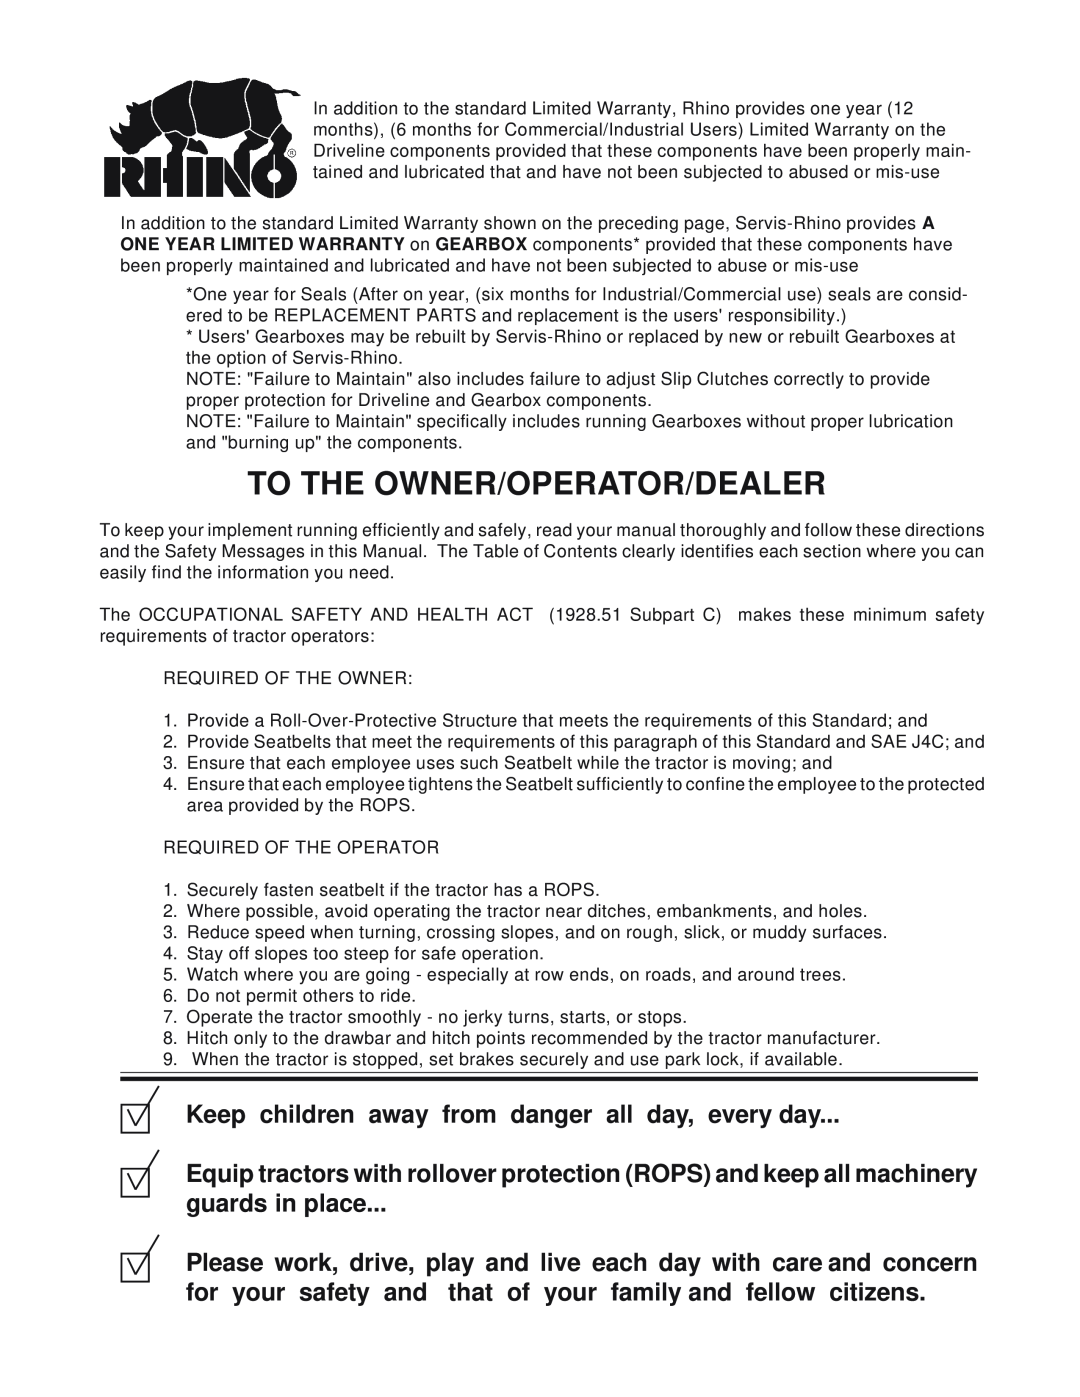 Servis-Rhino FM84A manual To The Owner/Operator/Dealer, Keep children away from danger all day, every day, guards in place 